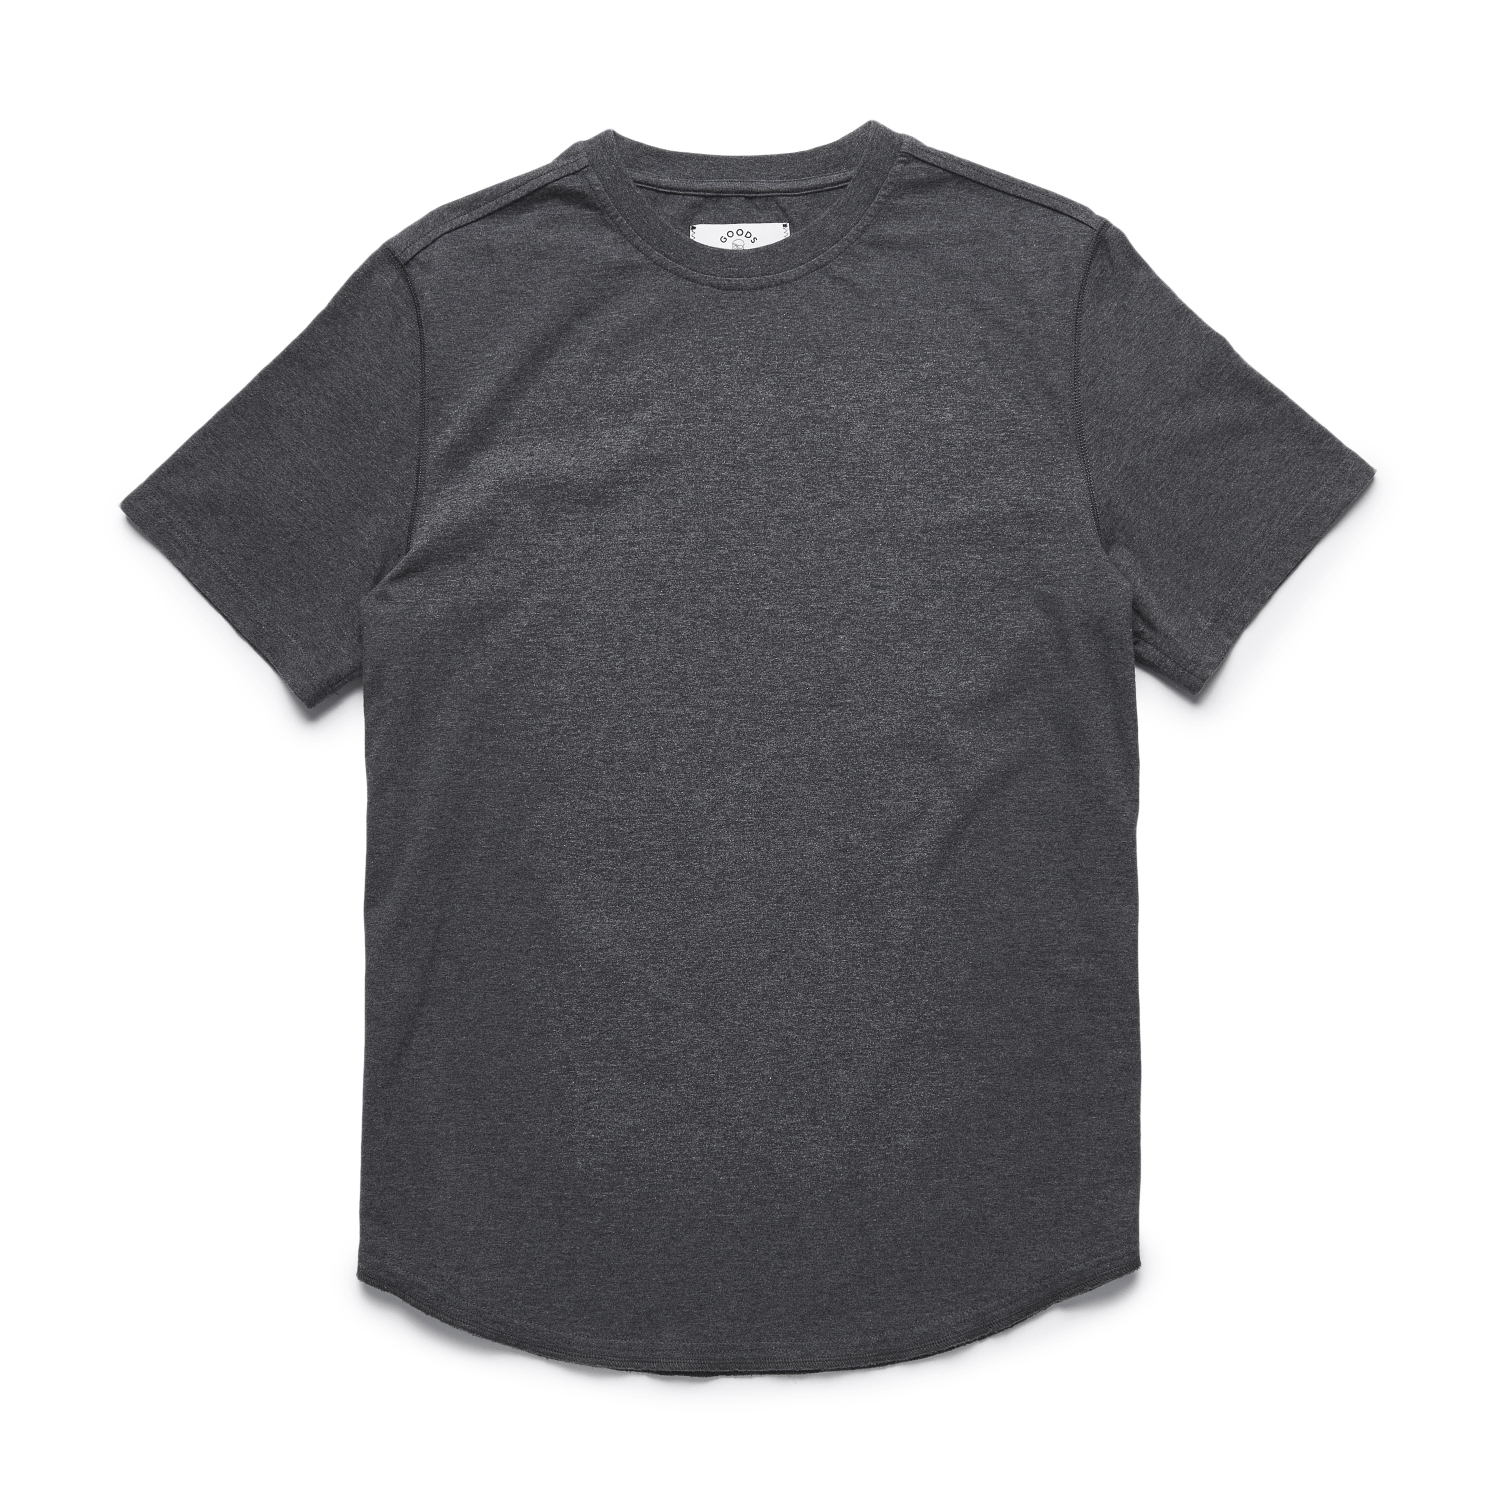 Surfside Supply Co. Shirts & Tops Salty Scoop Jersey Tee - Charcoal Heather